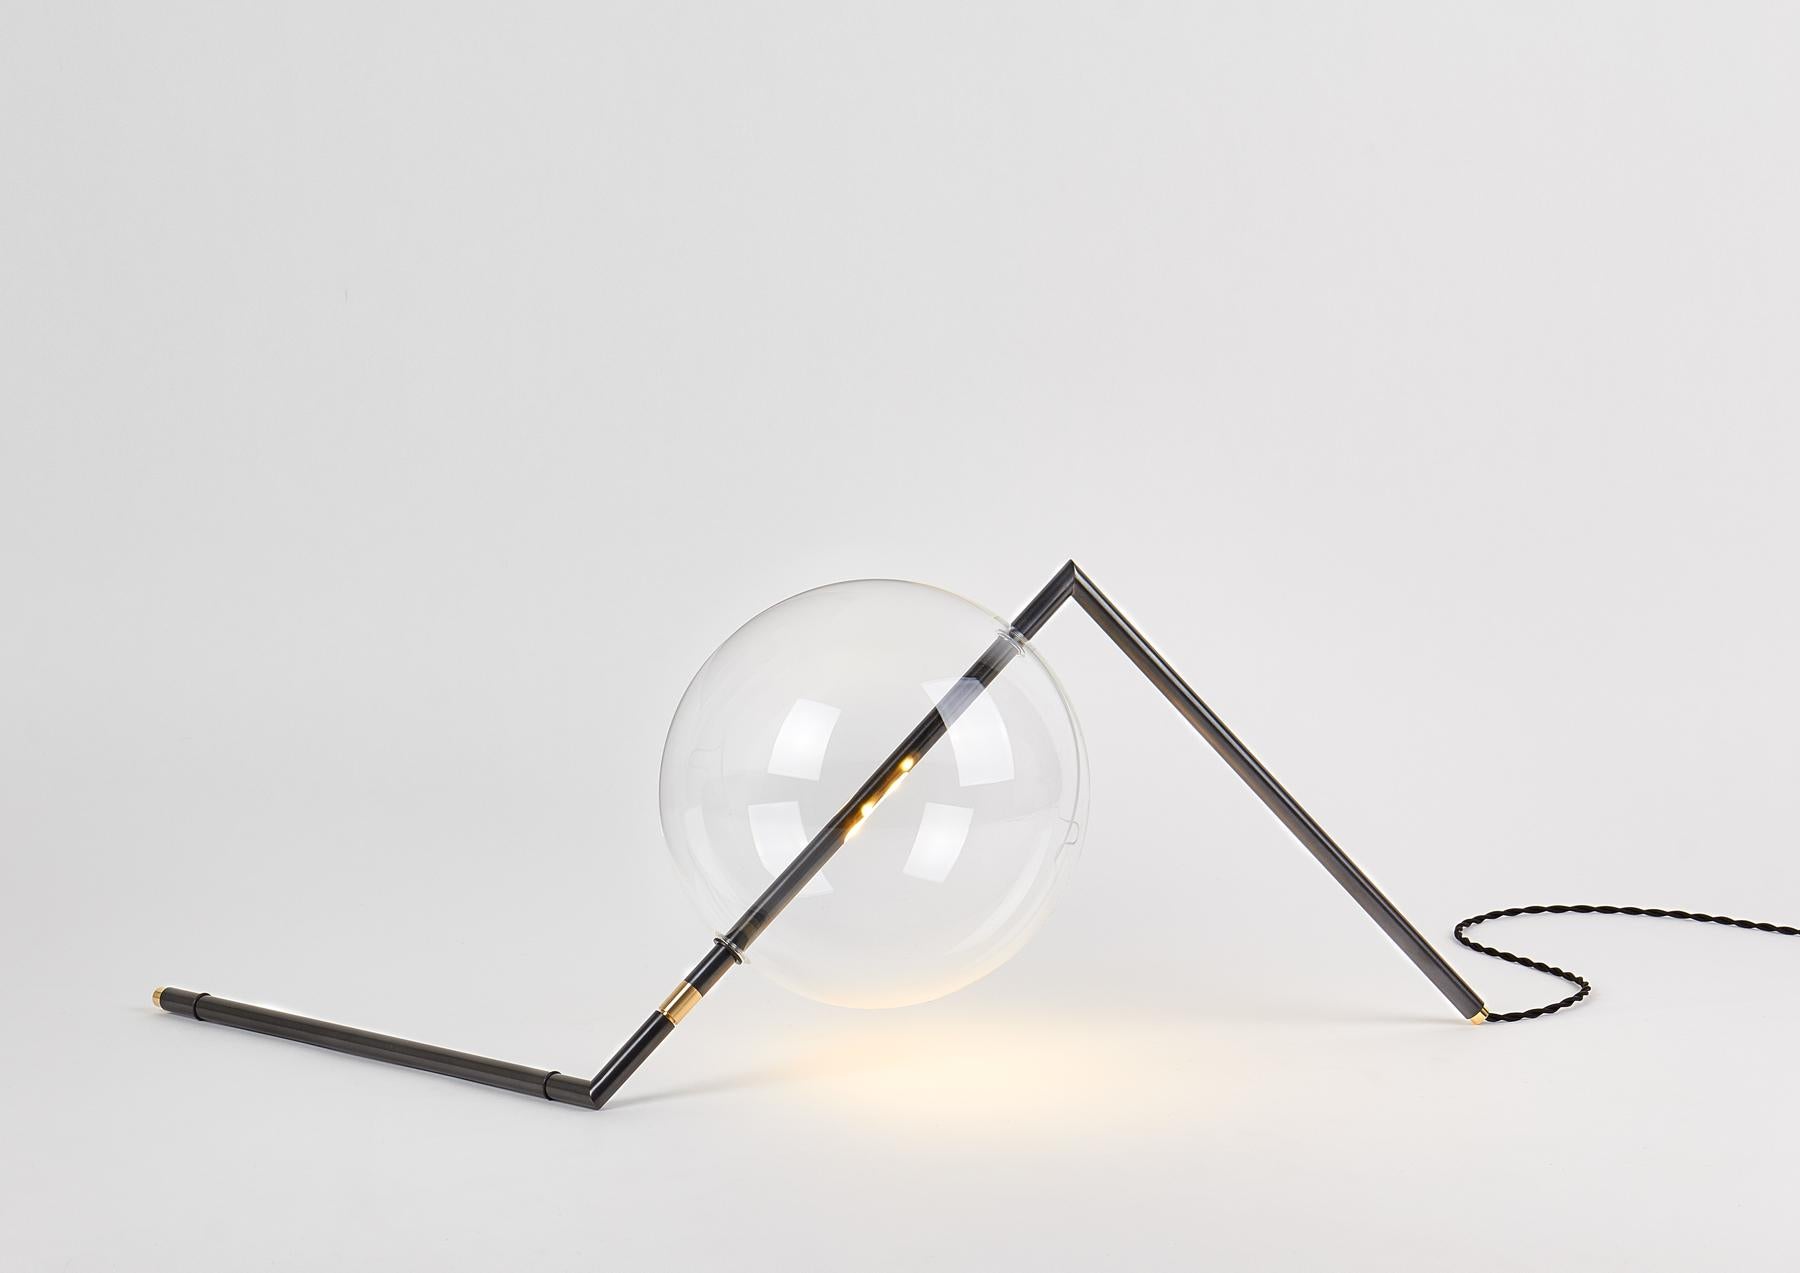 Designed to be positioned on the floor or on a console, the Alpi Floor/Table Lamp is a work of Abstract Art for the home. The exact arrangement of this Sculptural Decorative Piece can be adjusted using the nickel ring, and with the “inline Touch